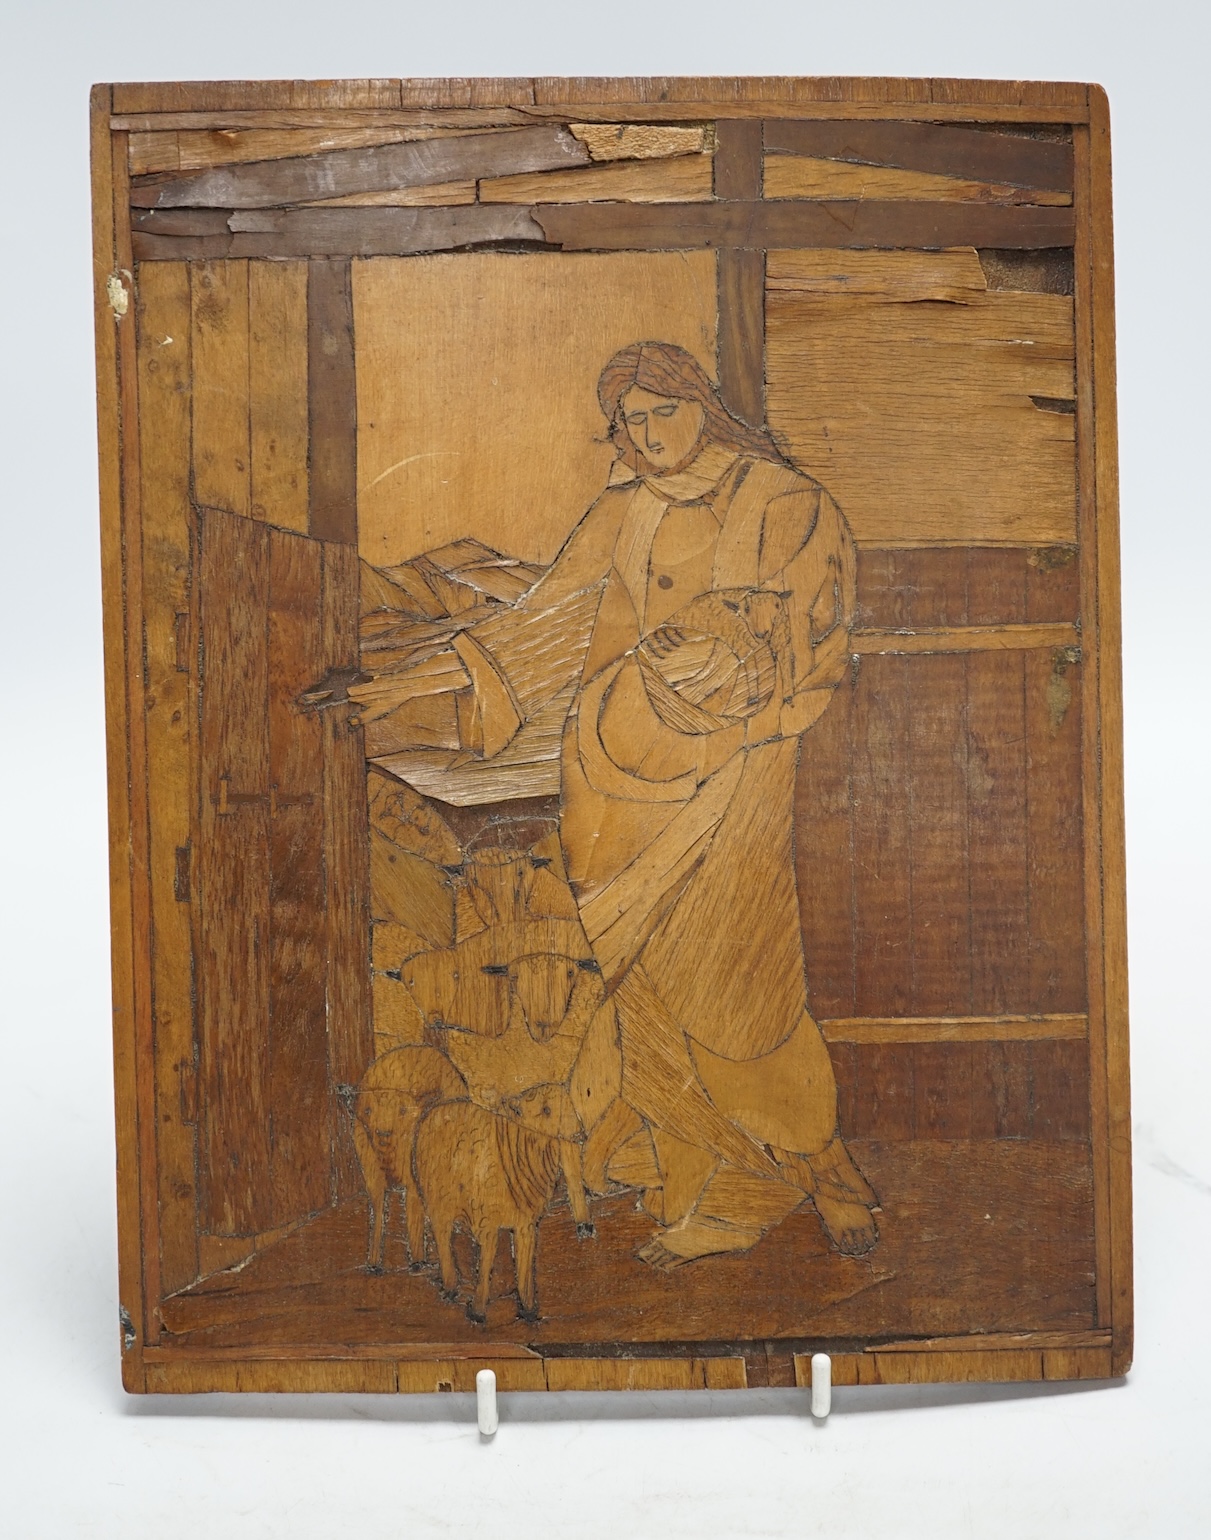 From the Studio of Fred Cuming. An Italian inlaid marquetry panel depicting a shepherd and flock of sheep, 27 x 21cm. Condition - poor